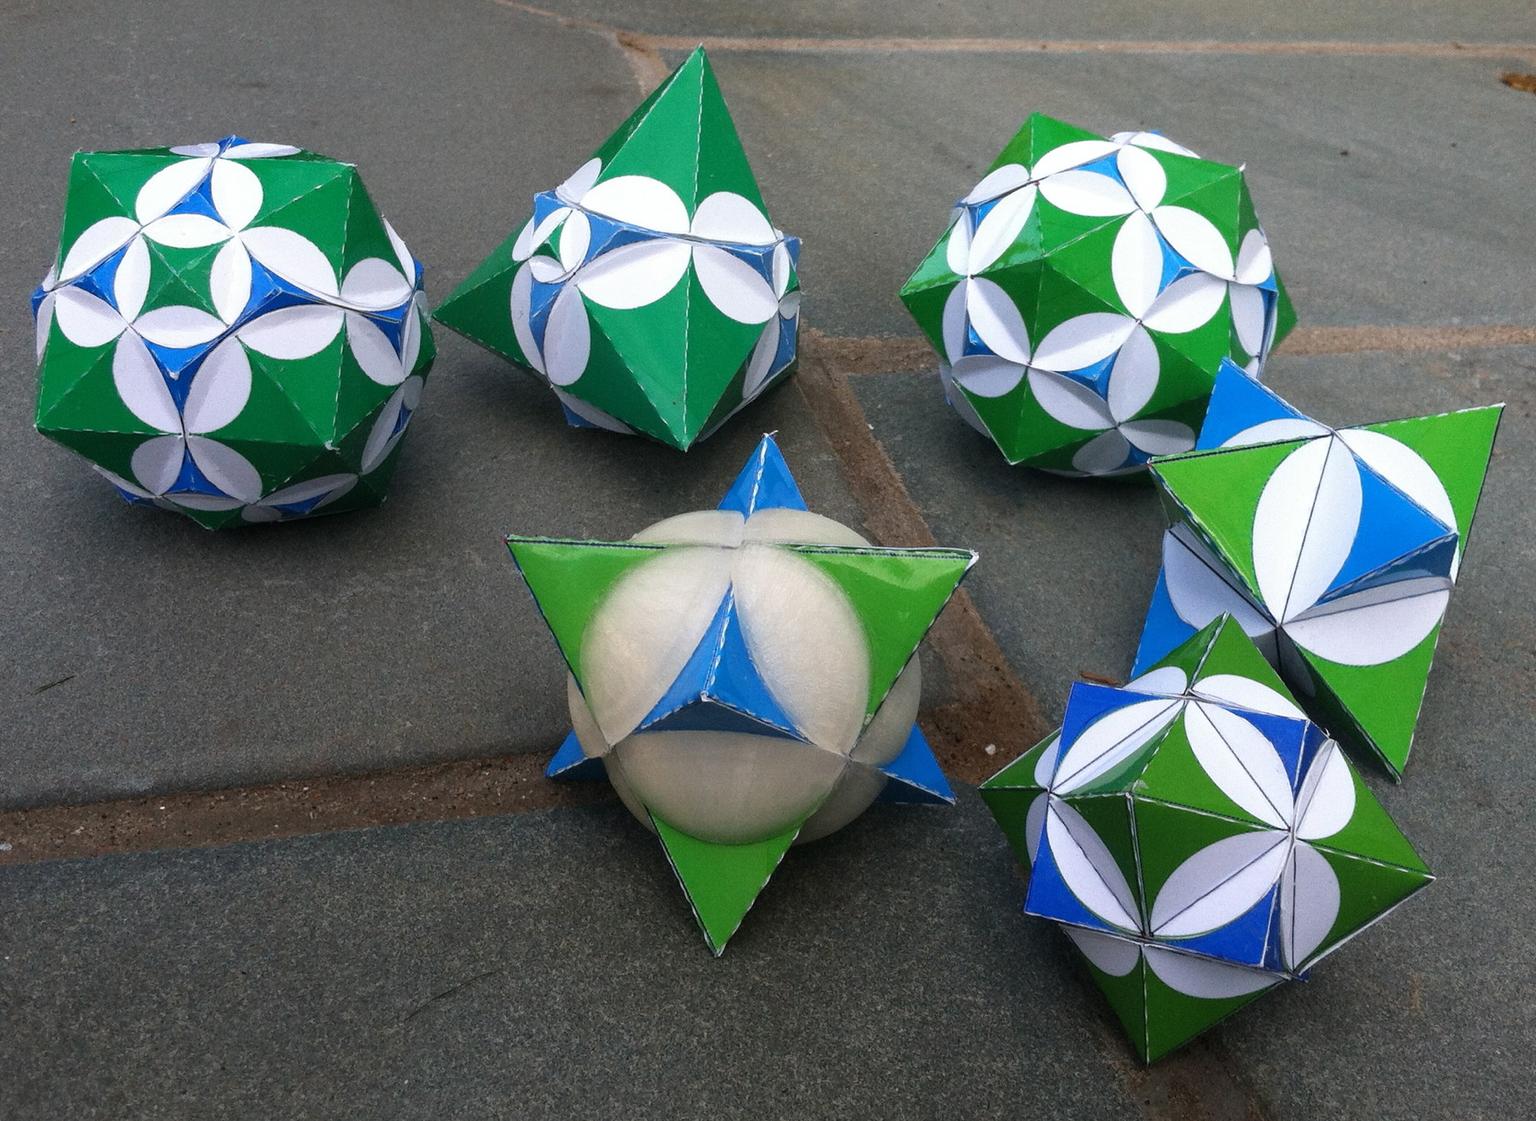 Image for entry 'Dualing Polyhedra'